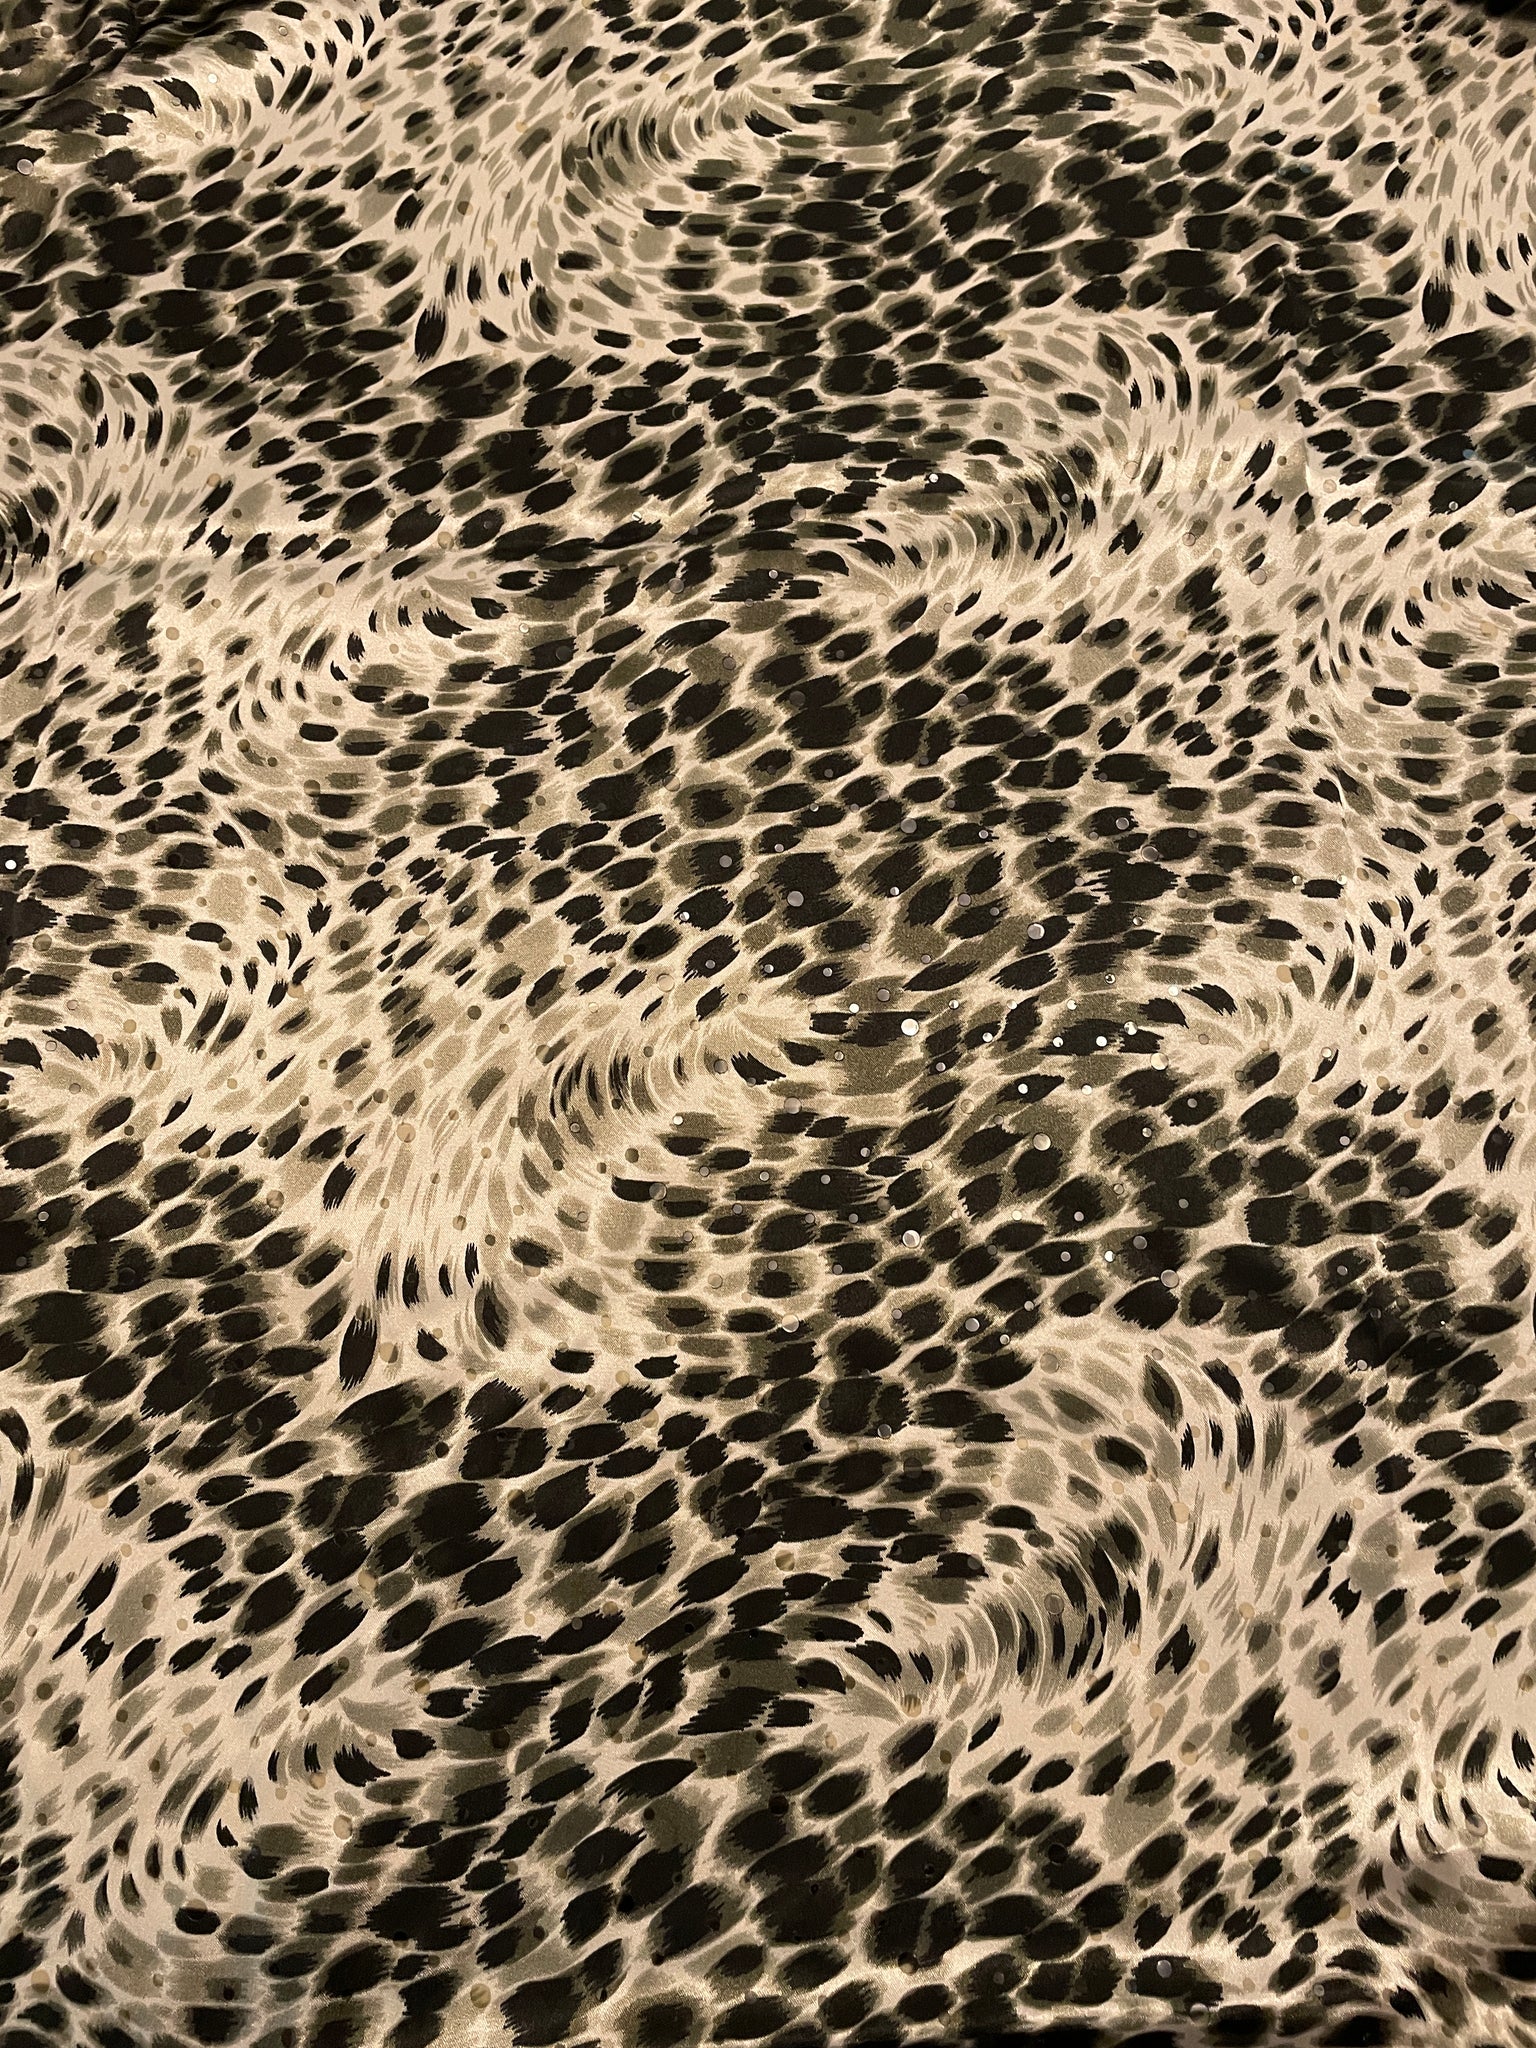 SALE 1 5/8 YD Polyester Charmeuse - Gray and Black Cheetah